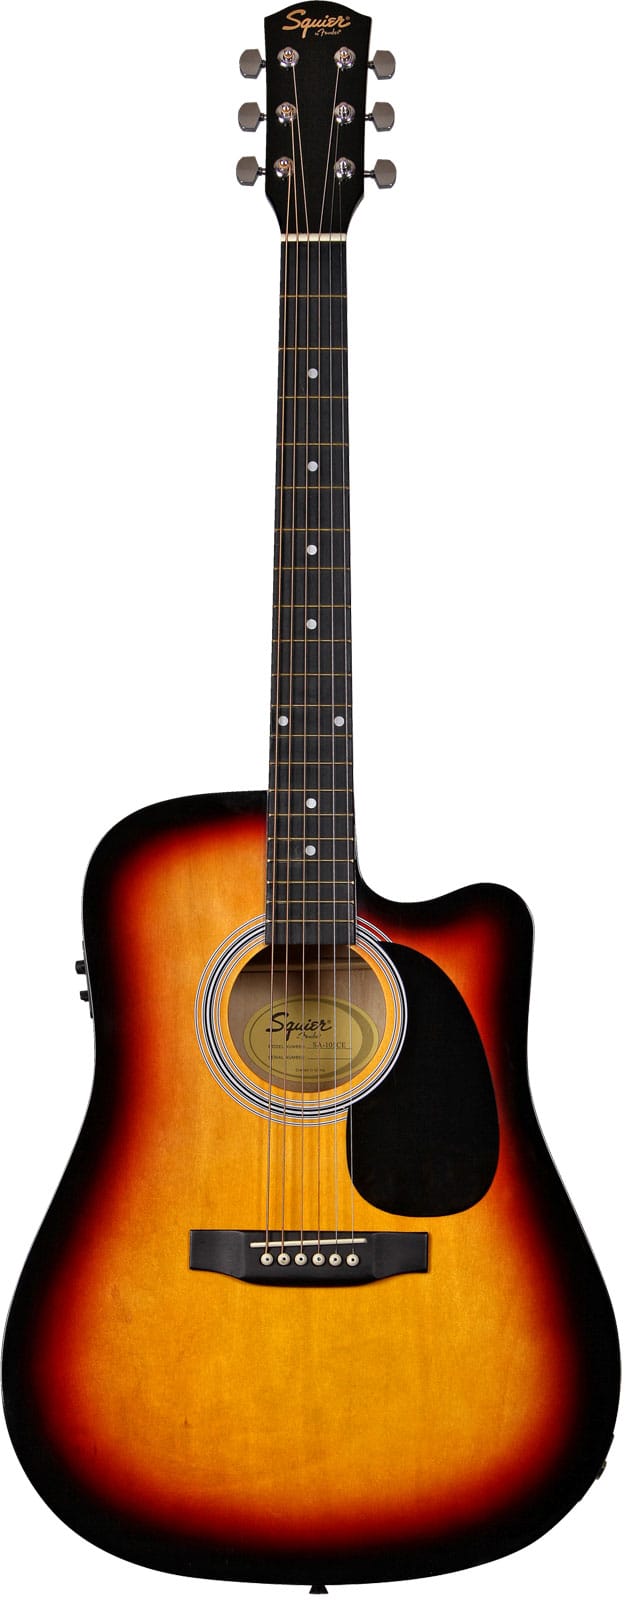 SQUIER SA-105CE, DREADNOUGHT CUTAWAY, STAINED HARDWOOD FINGERBOARD, SUNBURST